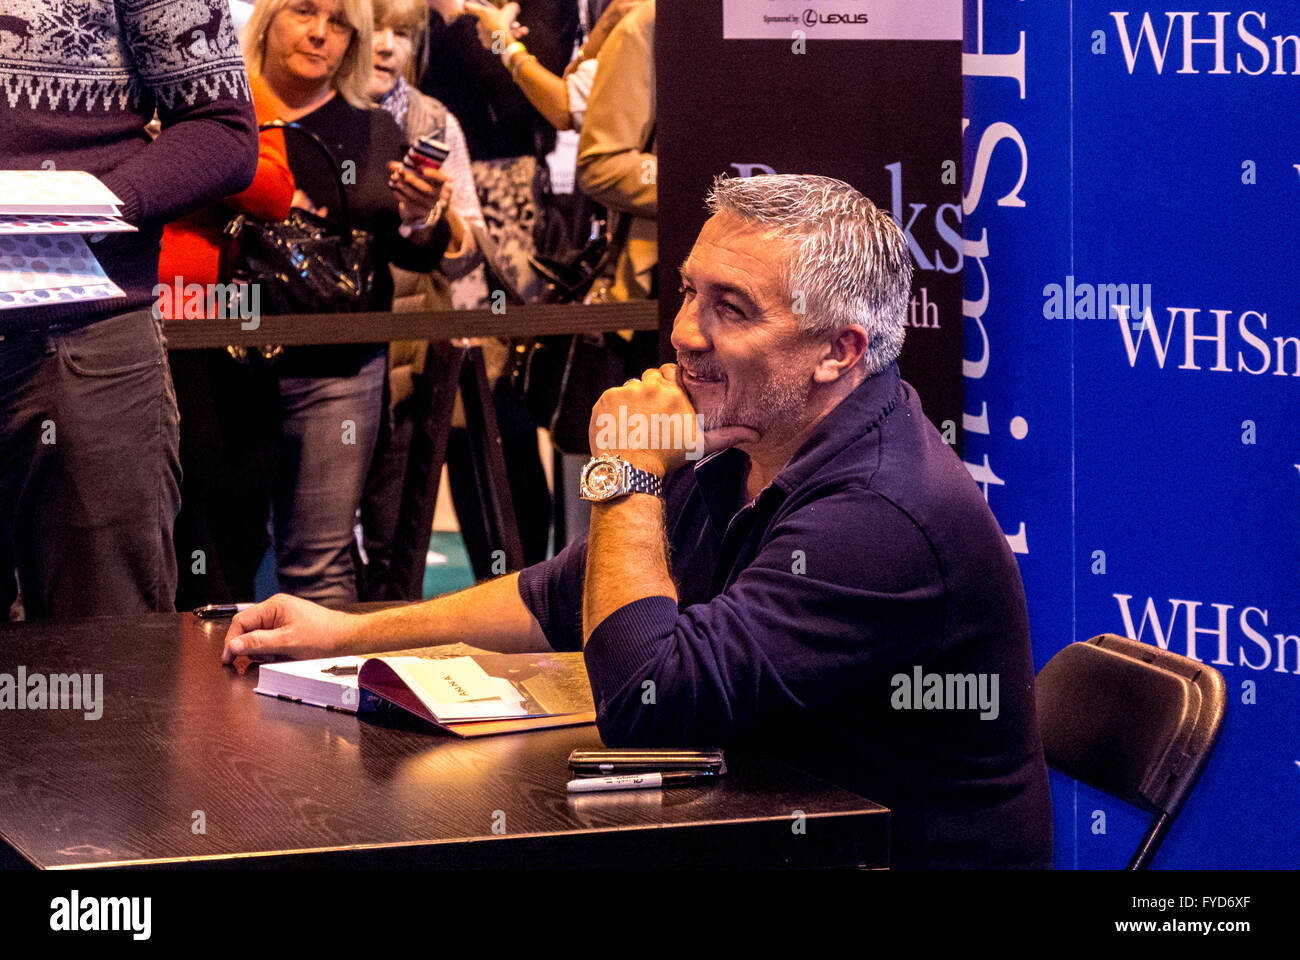 Paul Hollywood, celebrity appearance at W.H. Smith book signing event, UK. Stock Photo